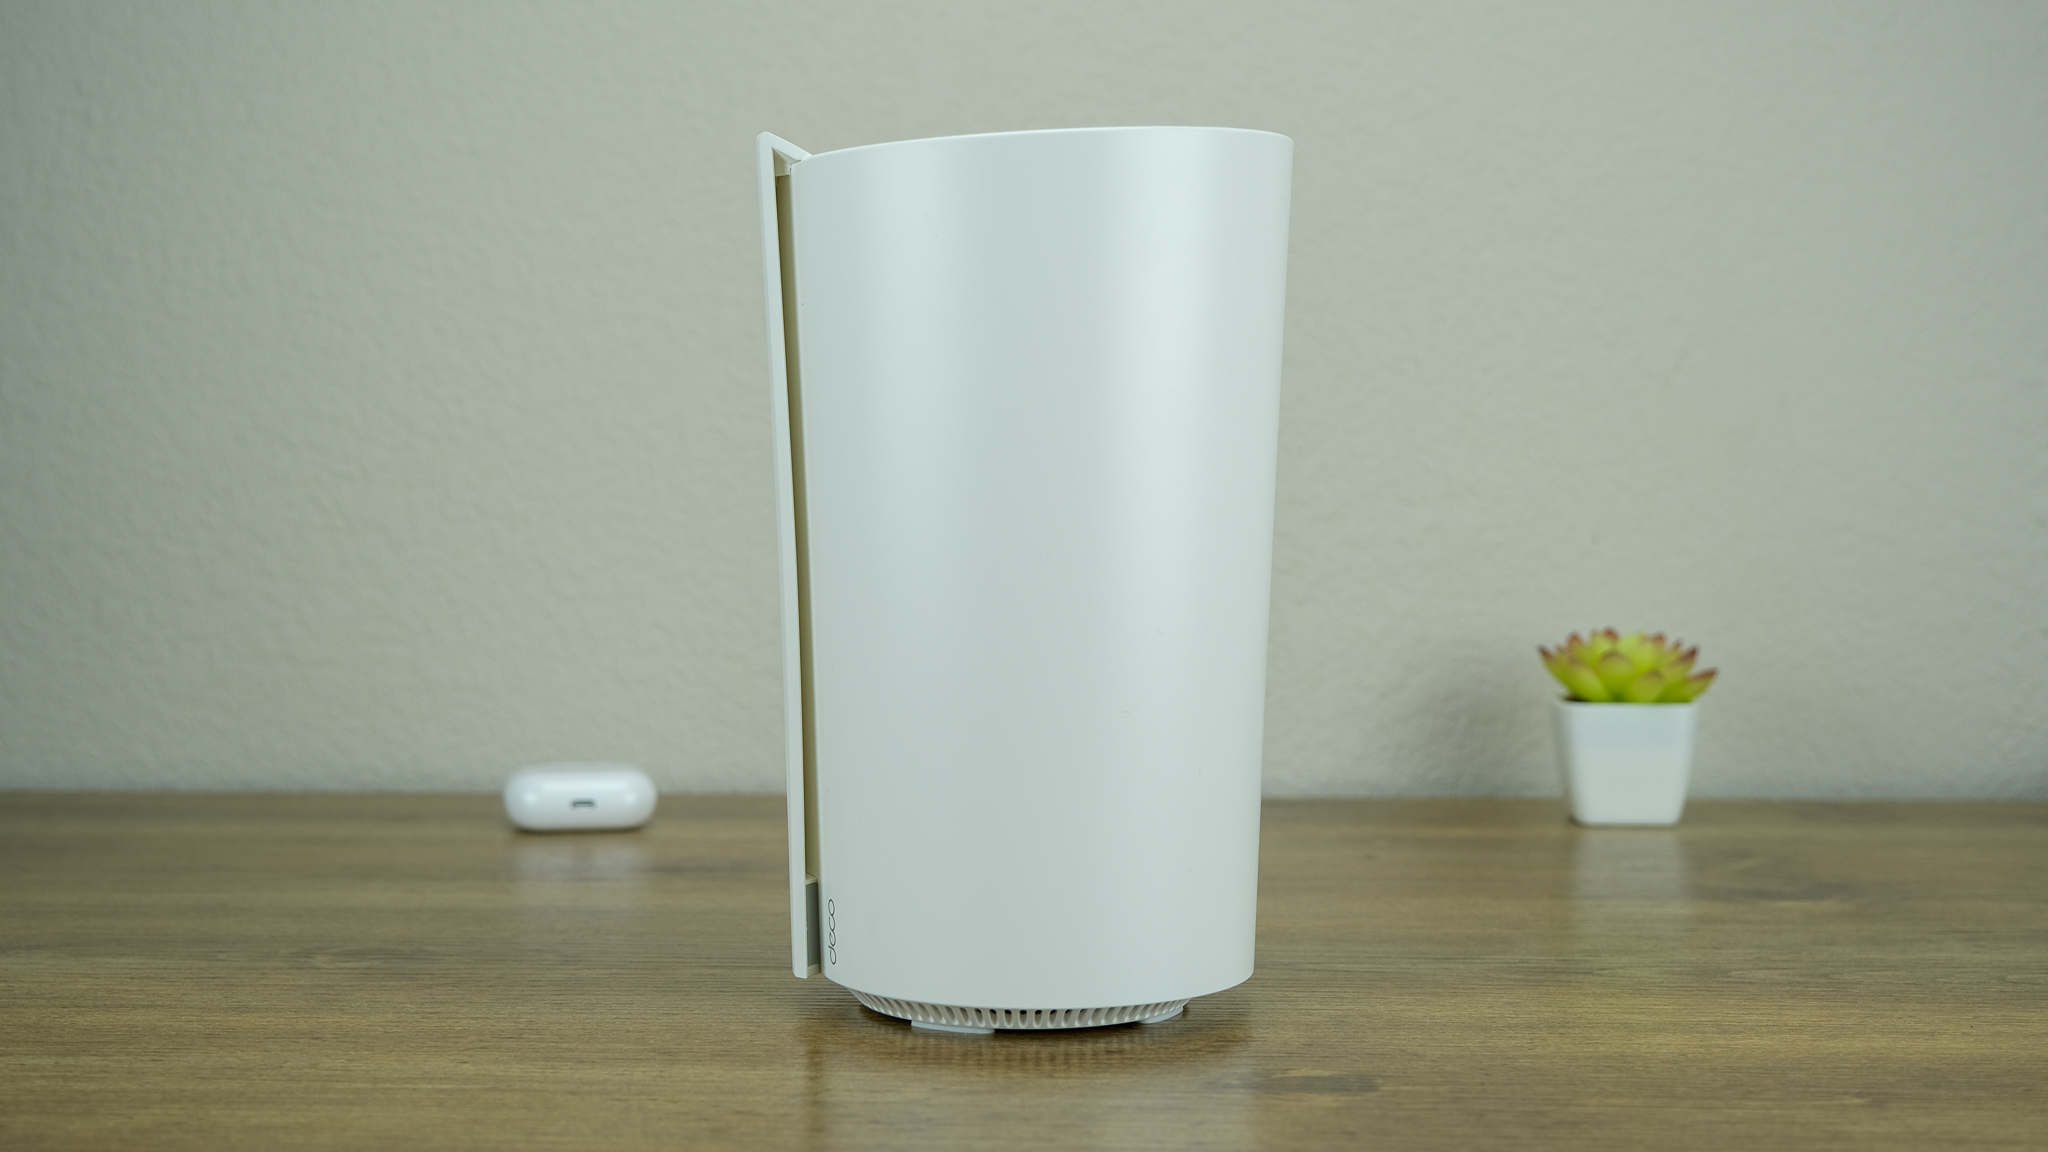 TP-Link Deco X90 Mesh Router Review: High Performing at a High